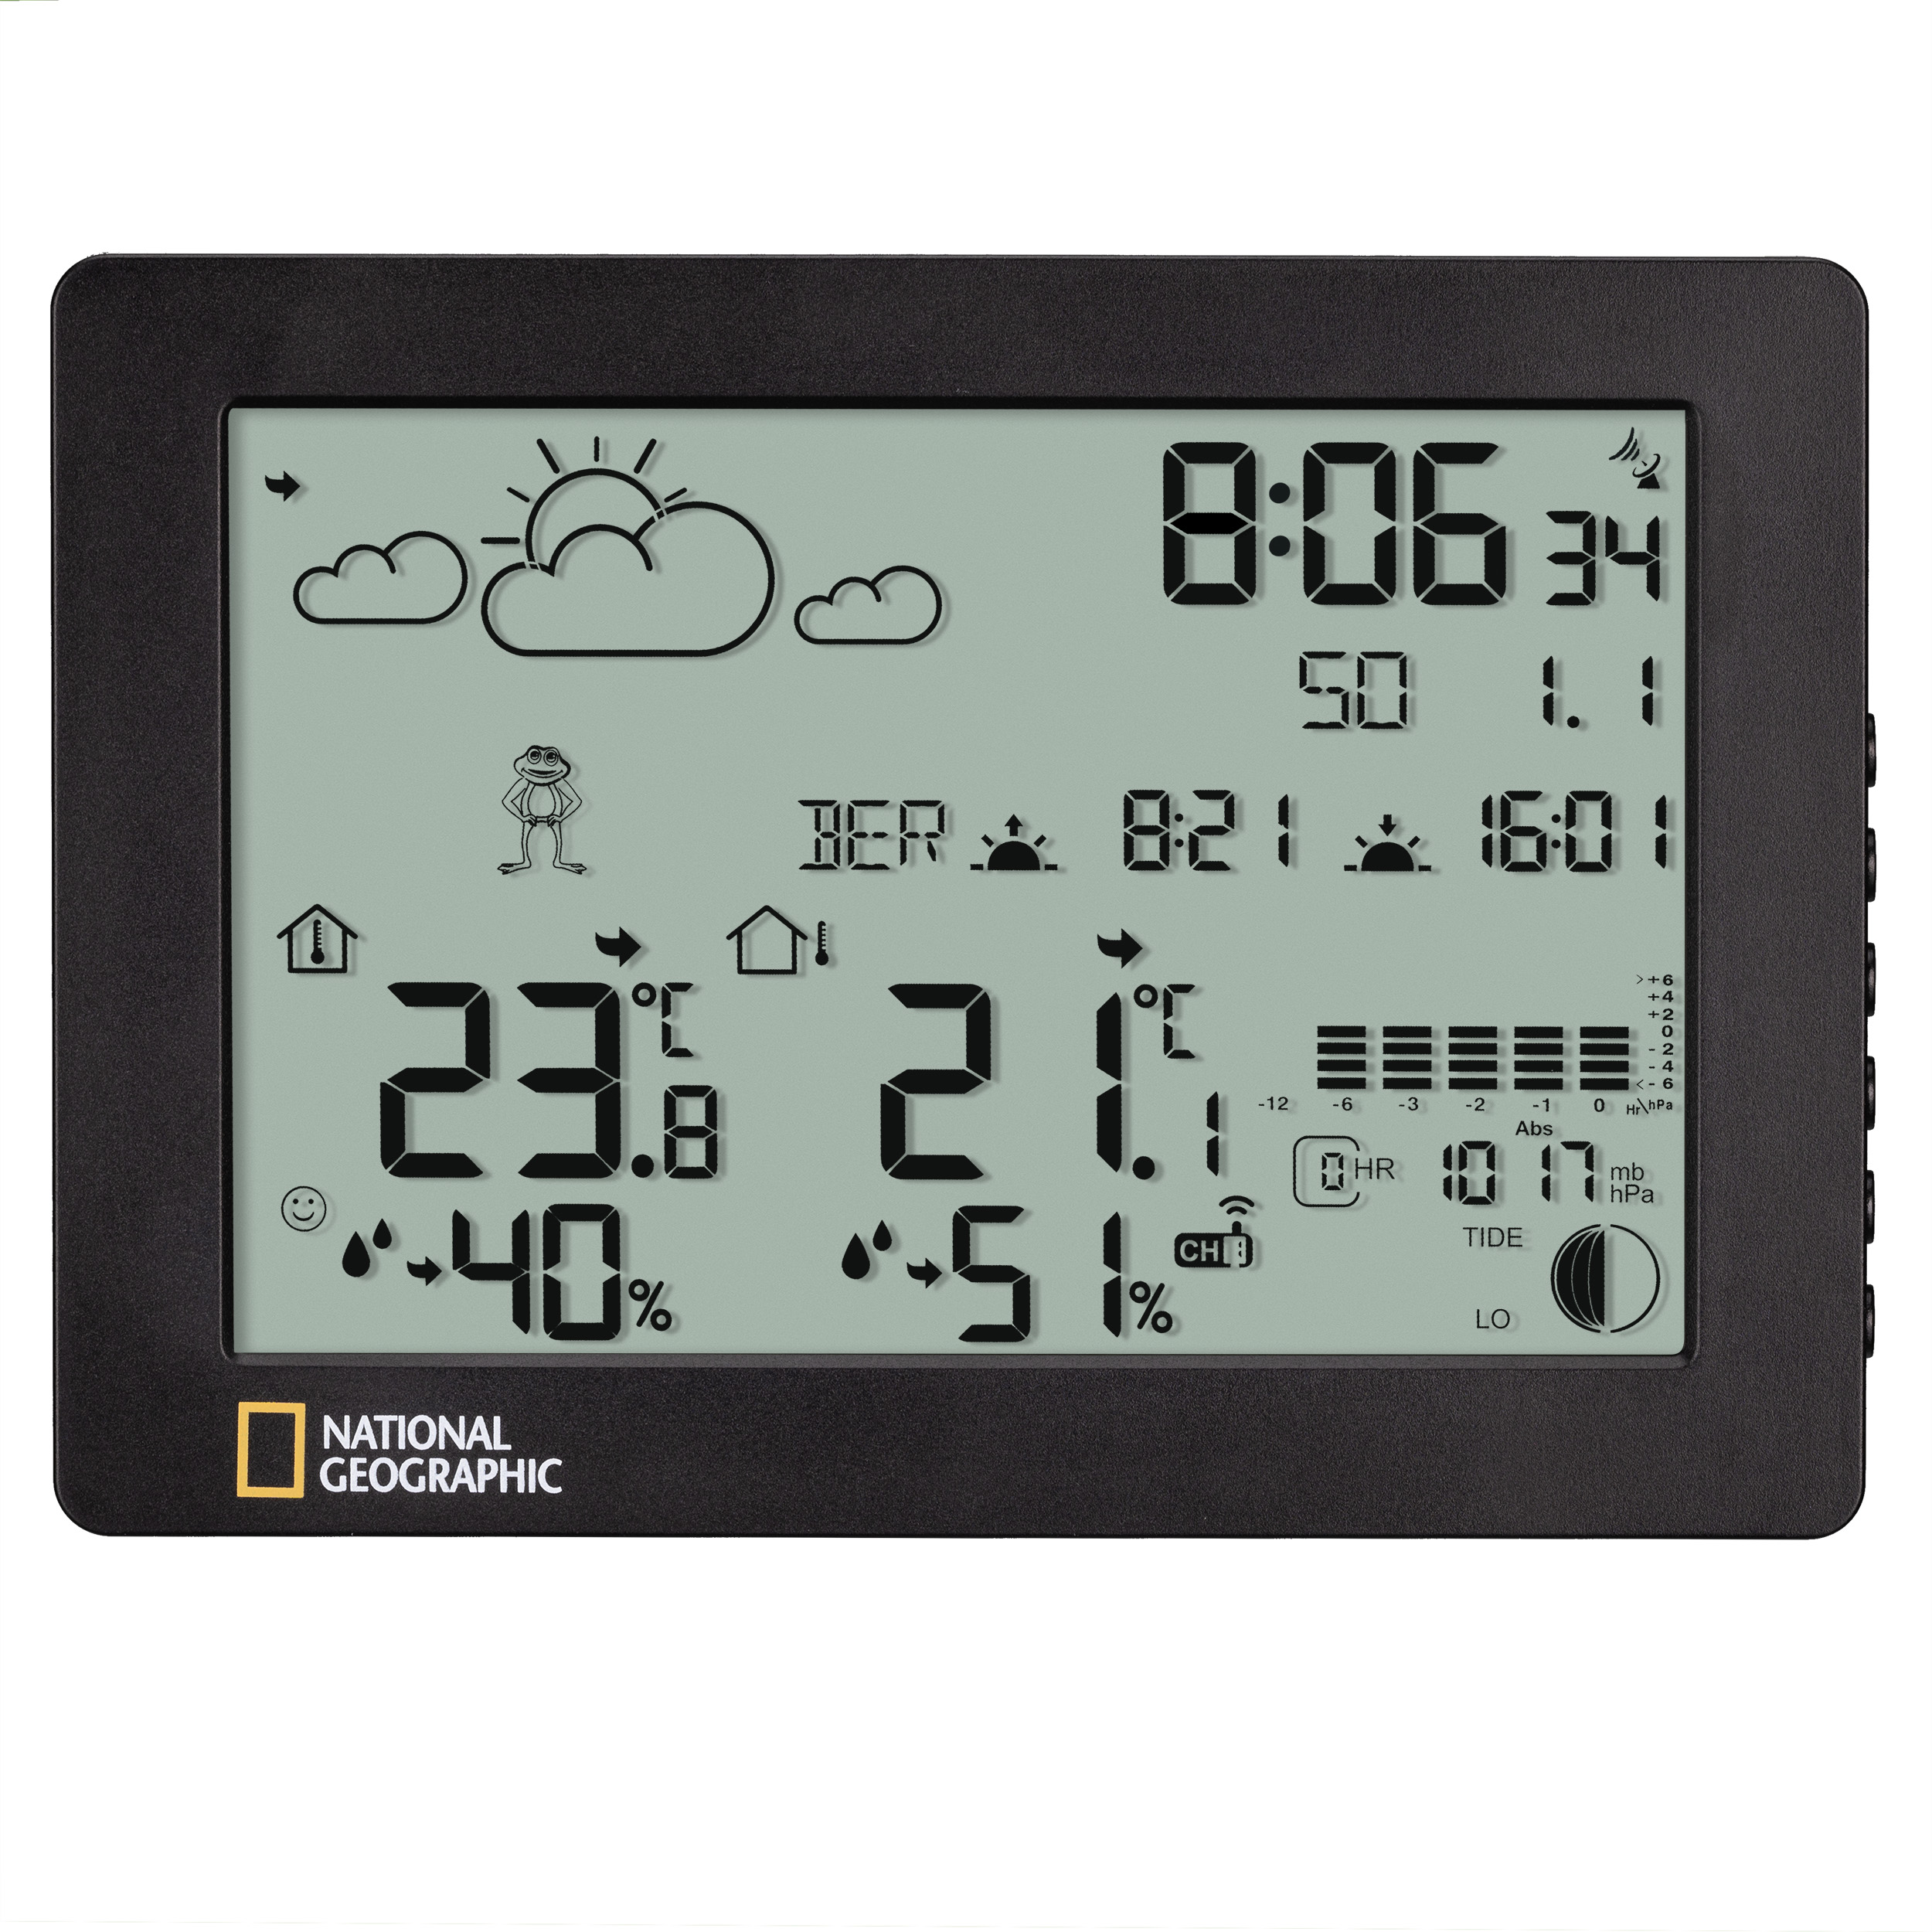 NATIONAL GEOGRAPHIC BaroTemp HZ weather station